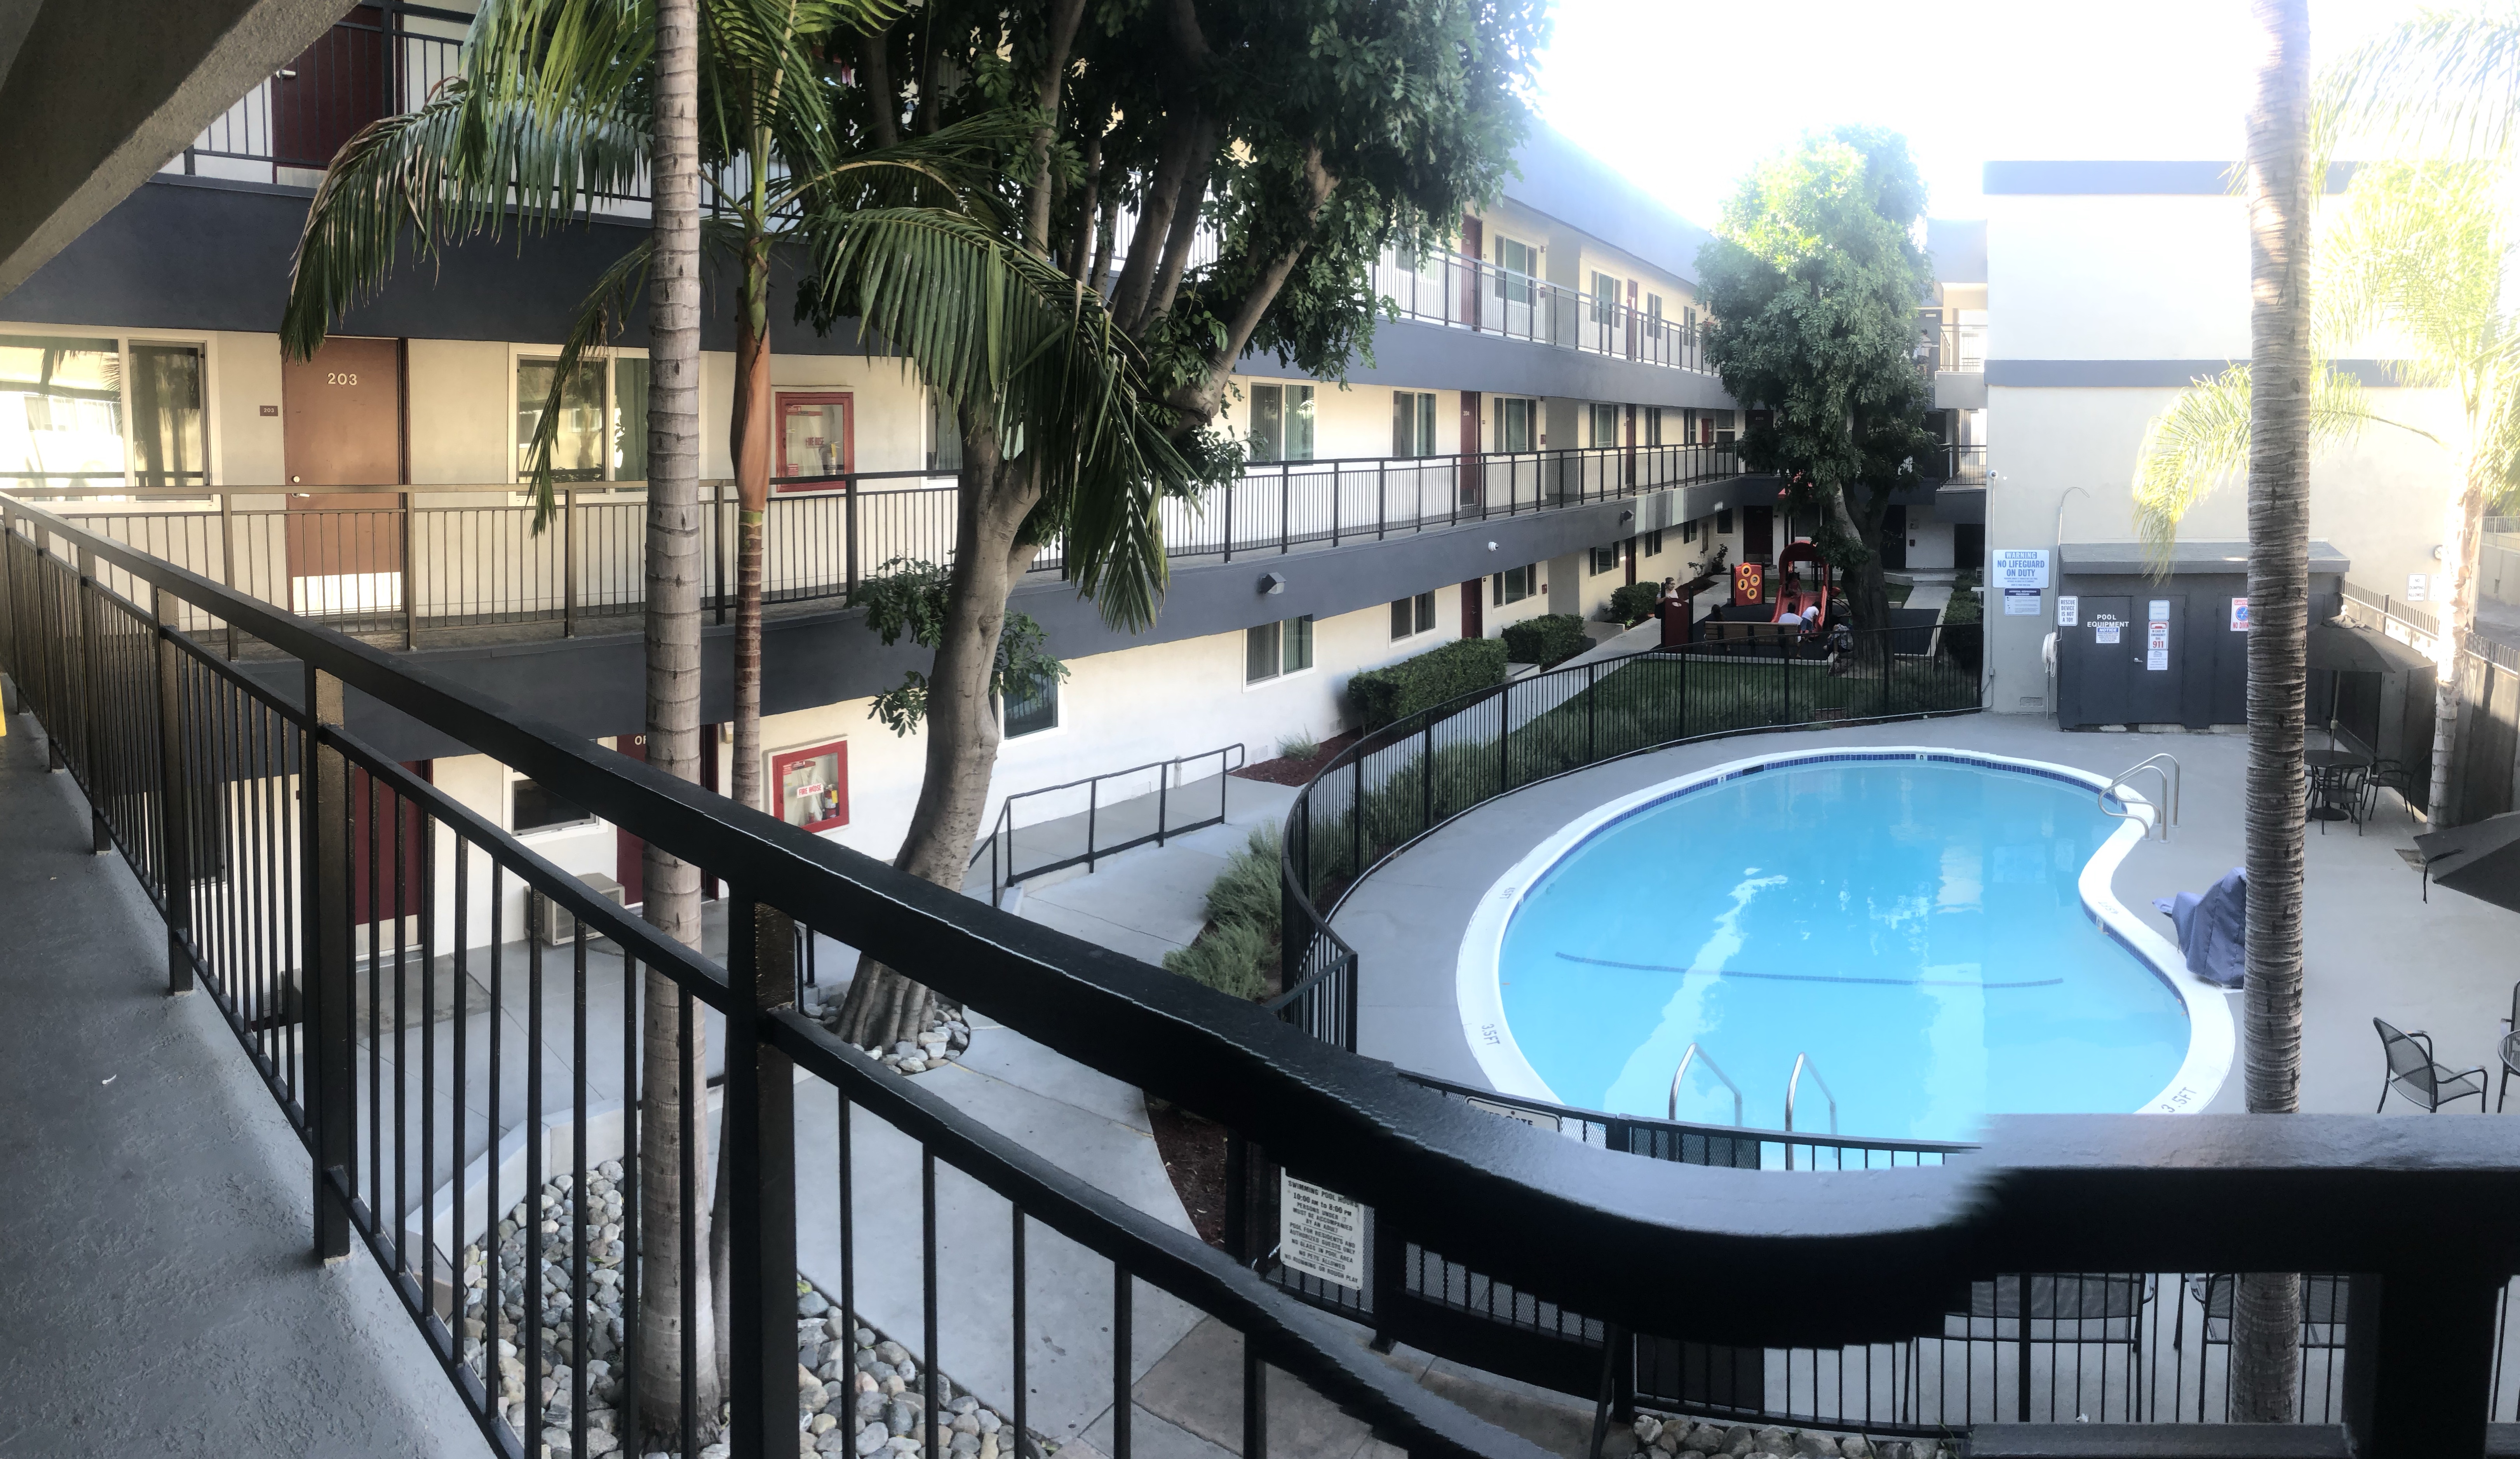 View of the building pool from apartment balcony